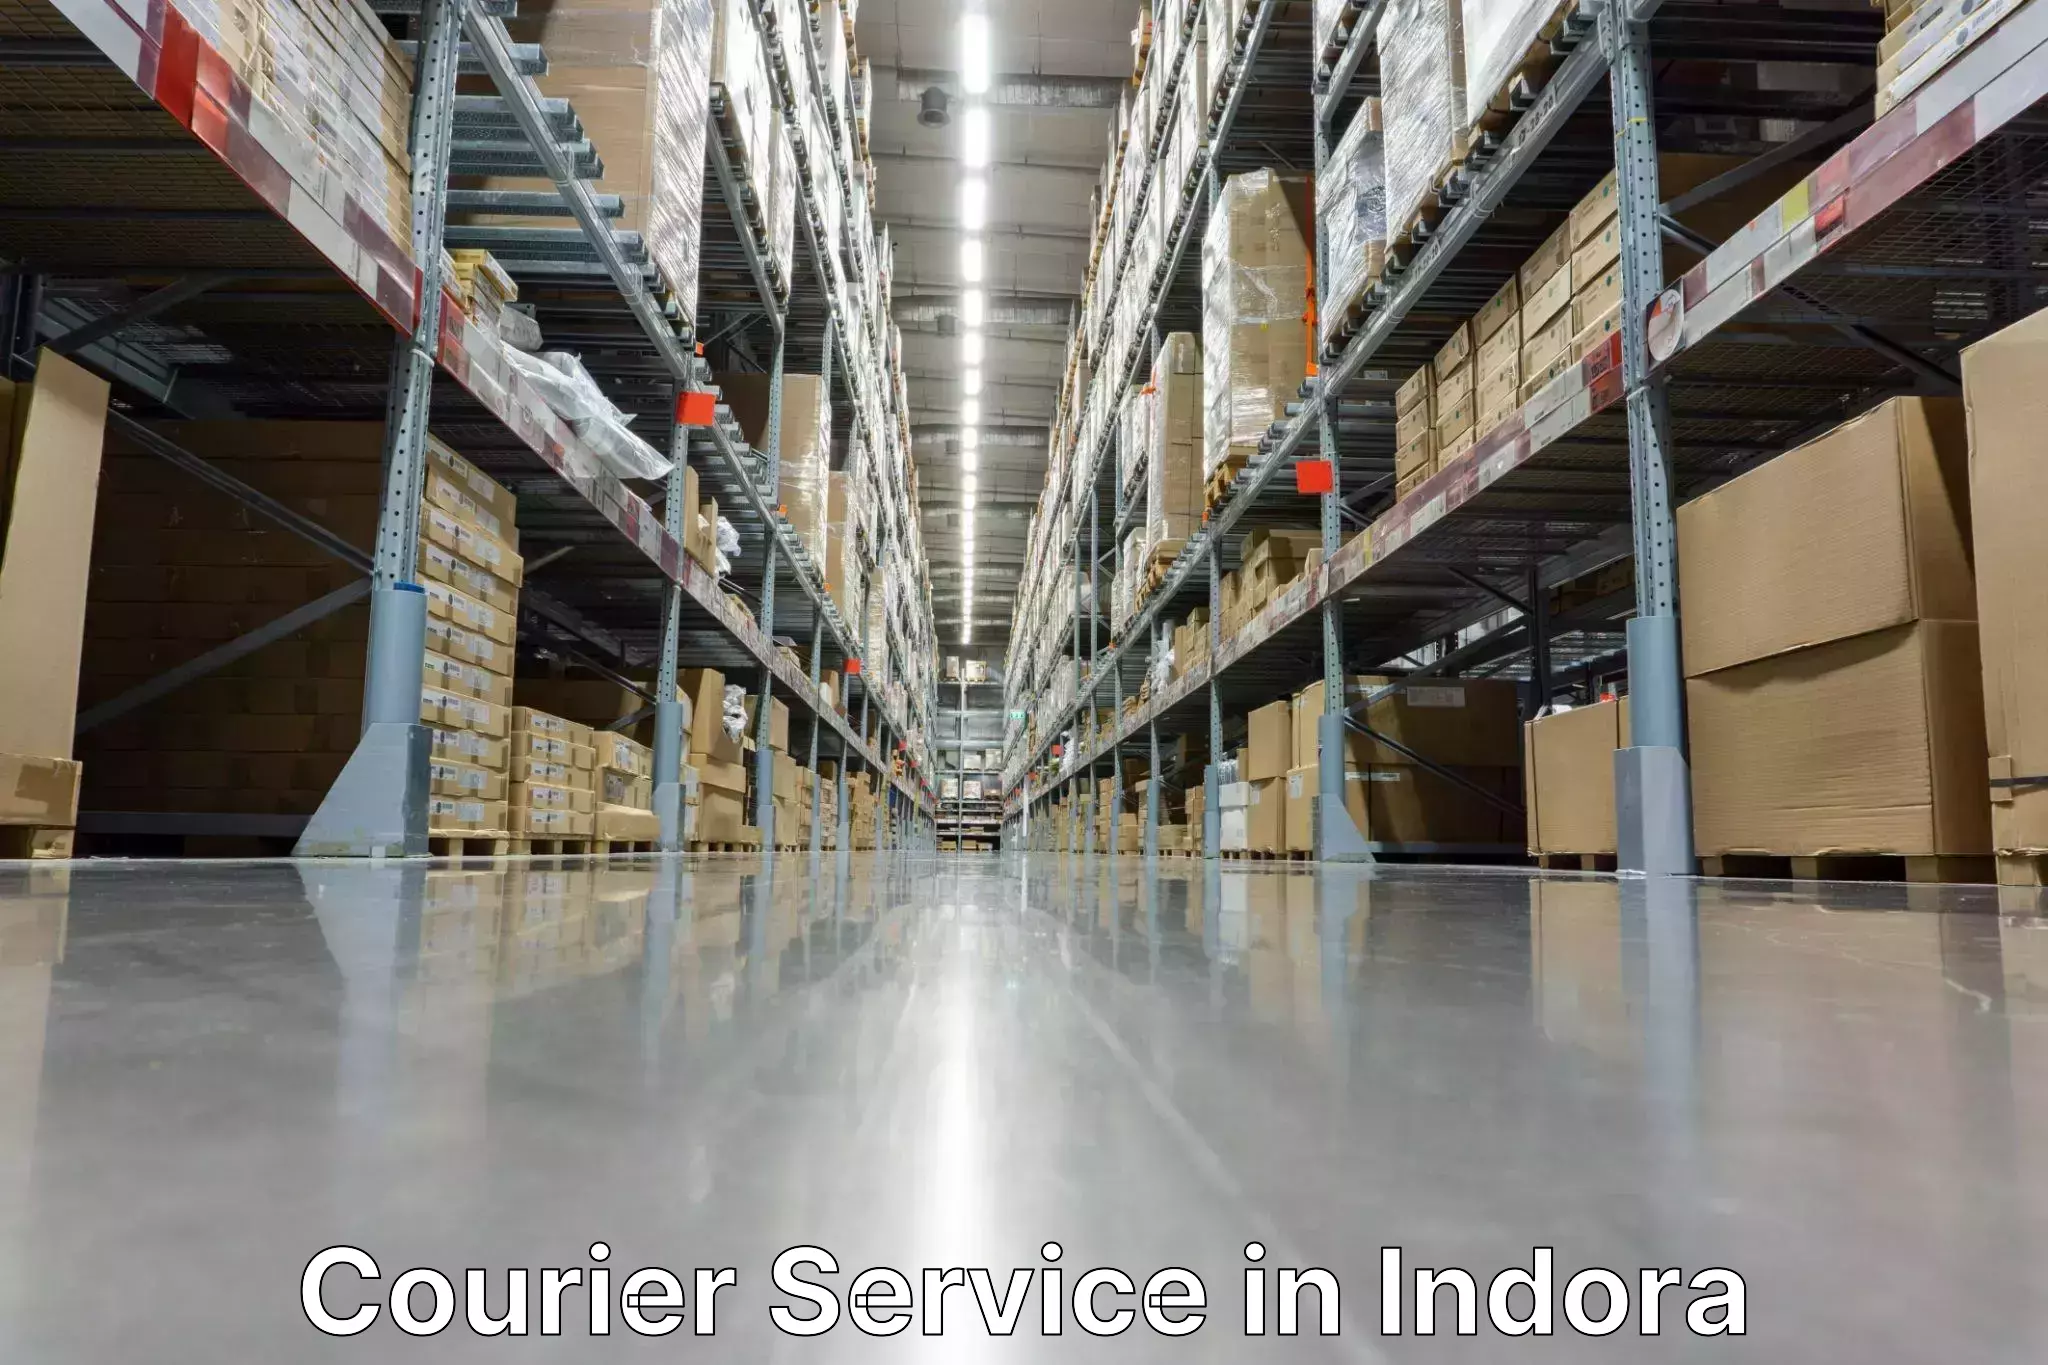 Logistics and distribution in Indora